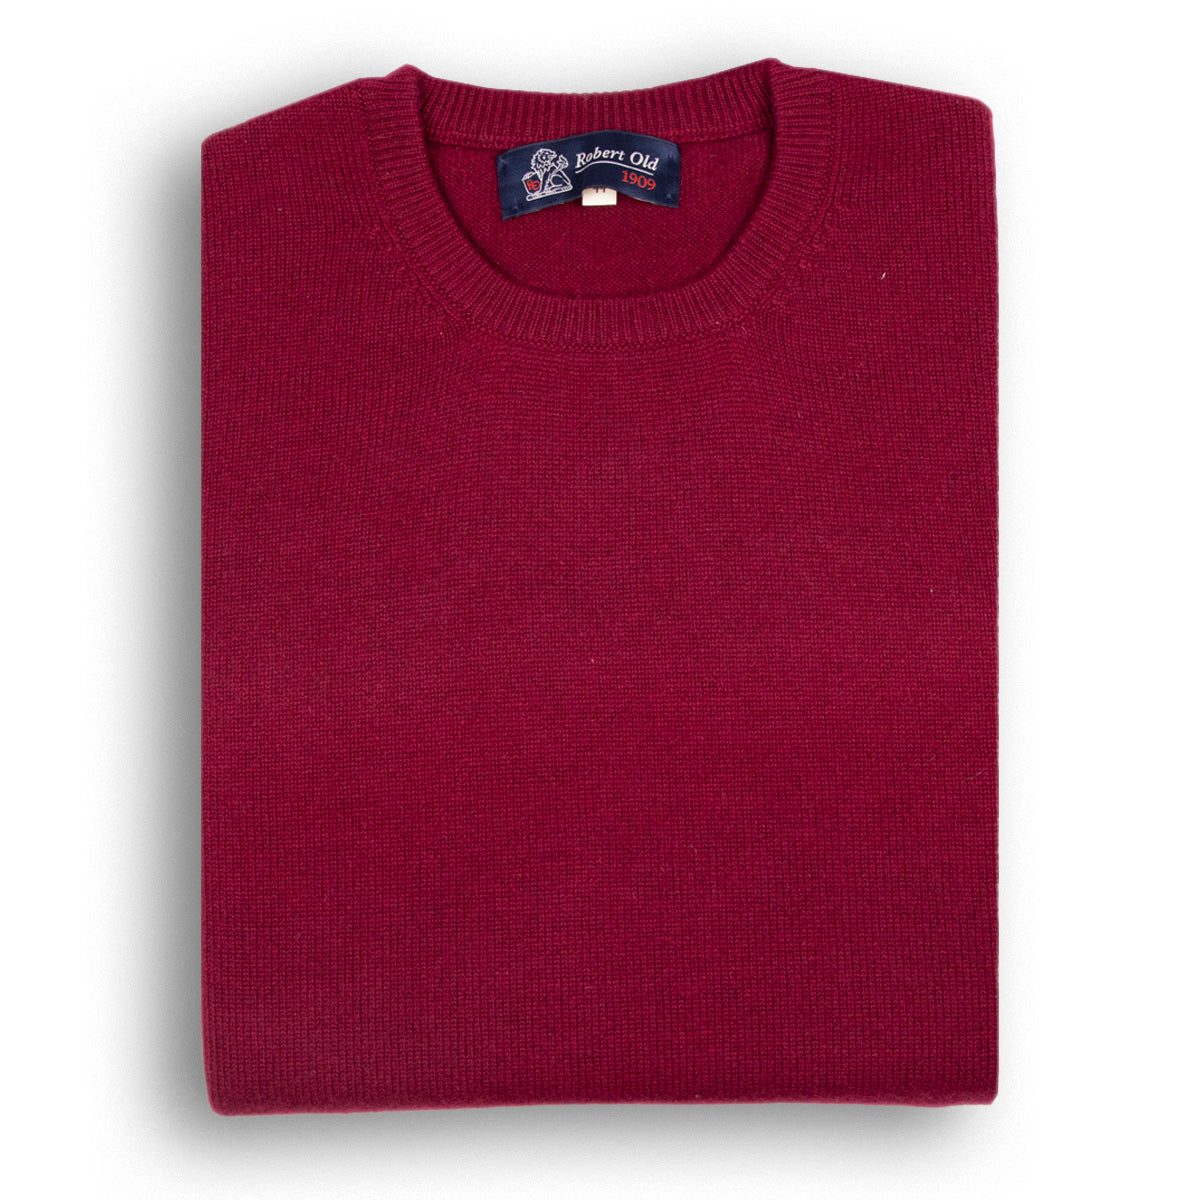 Claret Red Tiree 4ply Crew Neck Cashmere Sweater  Robert Old UK 36"  